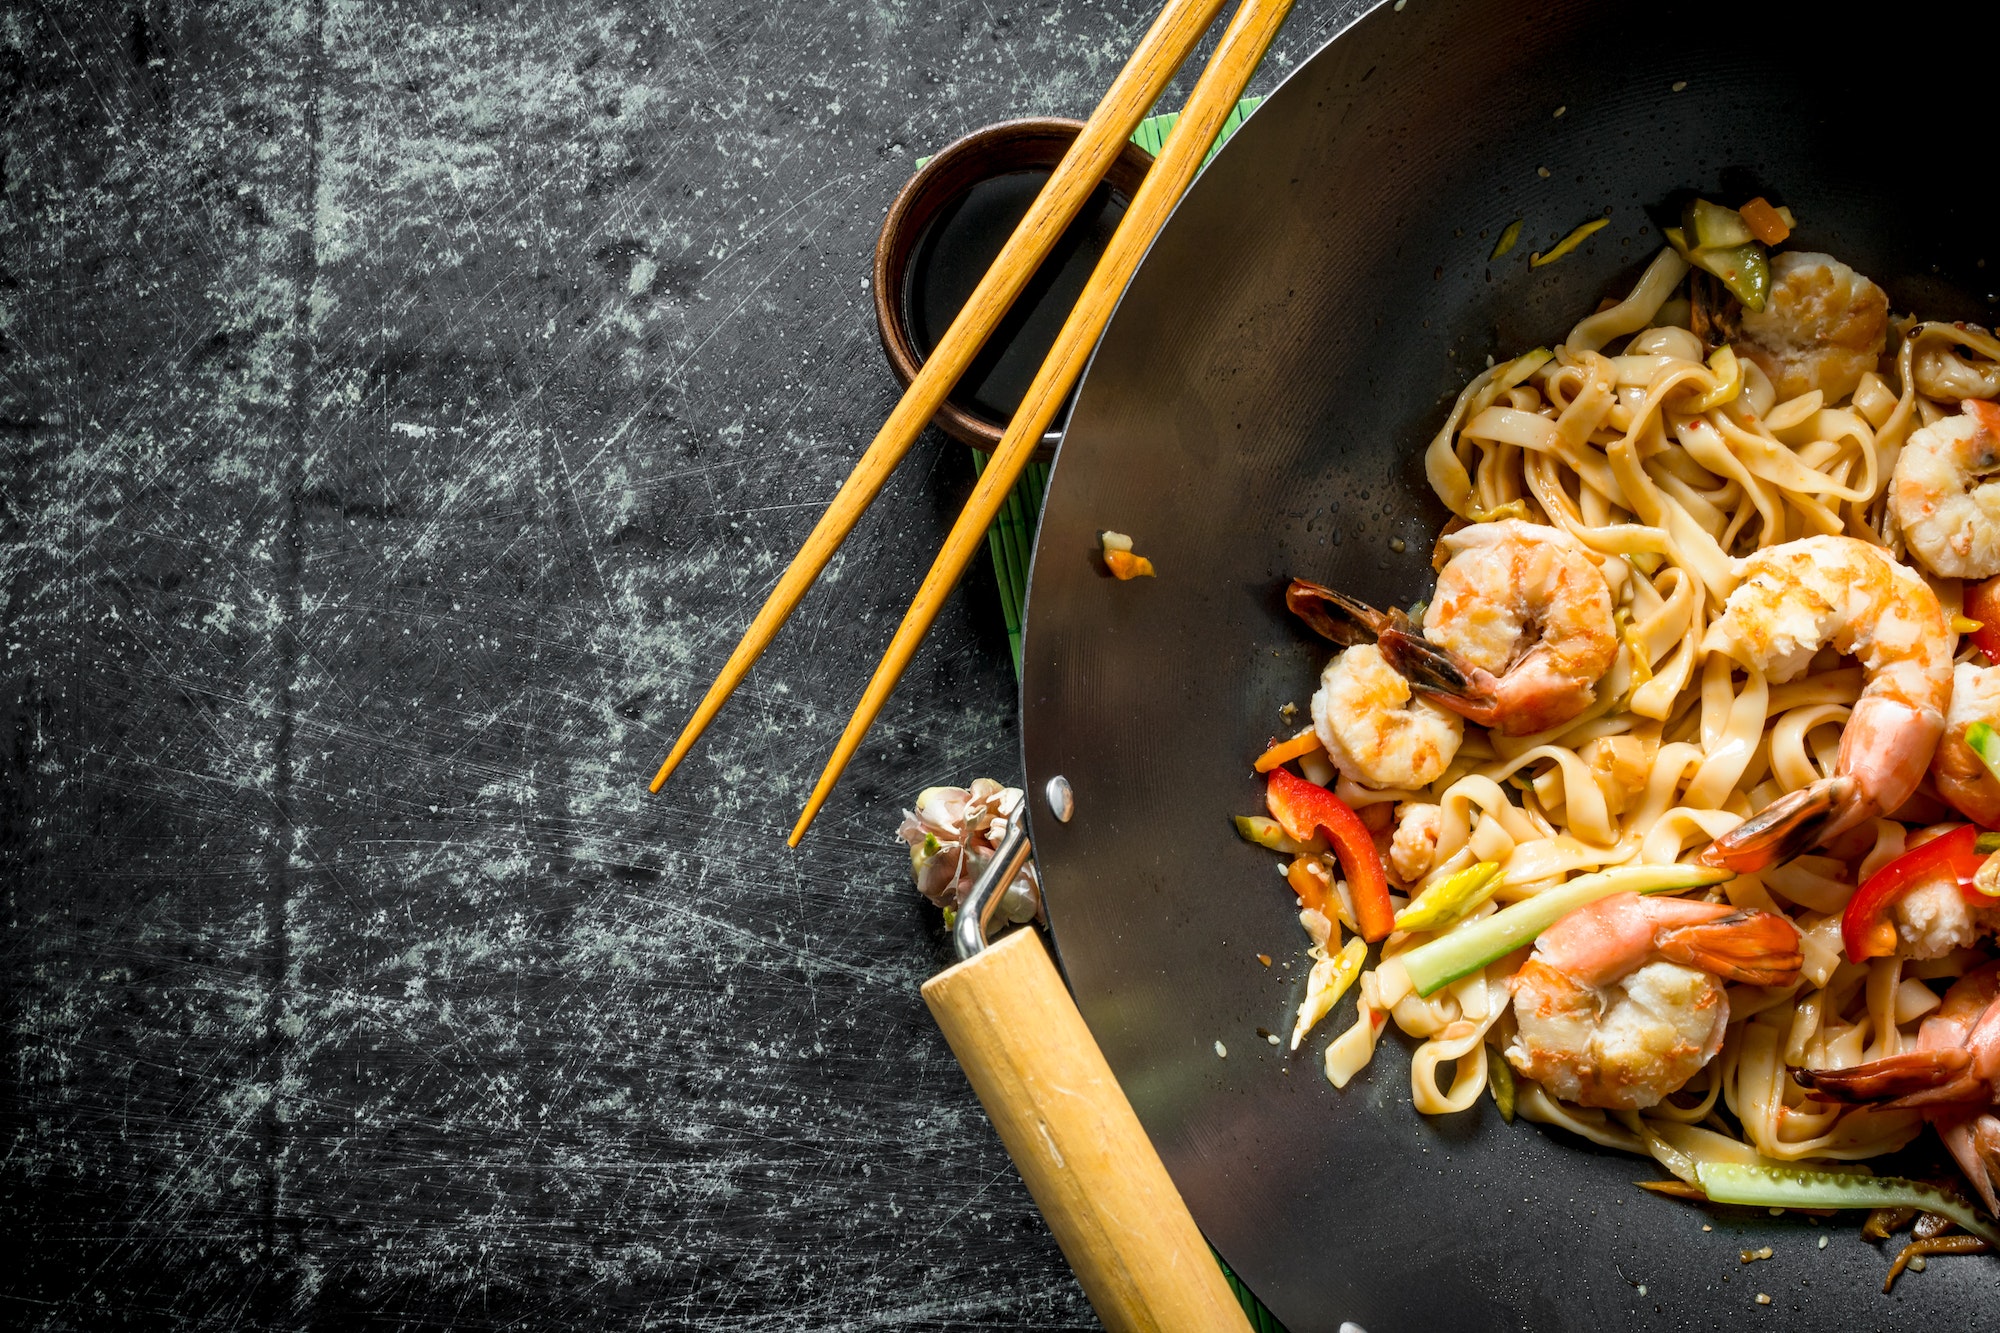 Chinese wok. Udon noodles in a wok pan with shrimp and sauce.